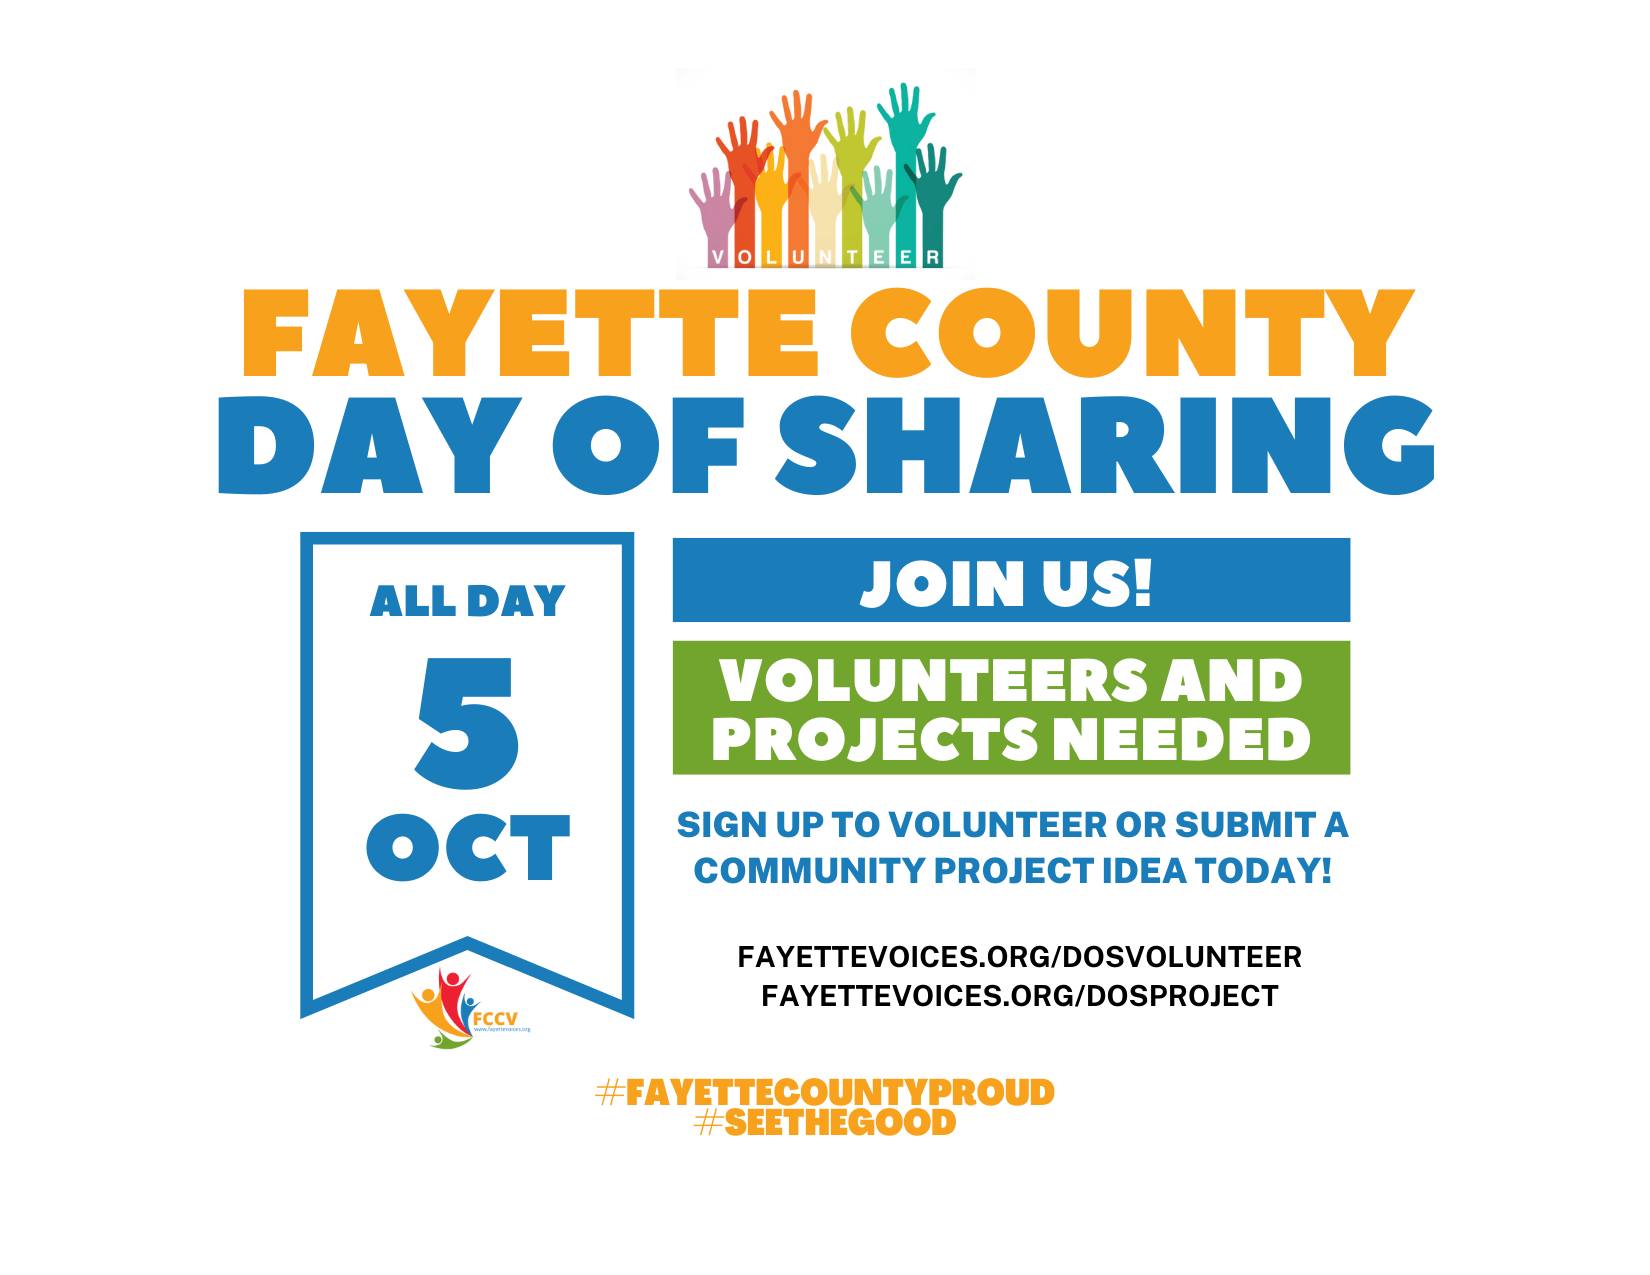 Fayette County Day of Sharing